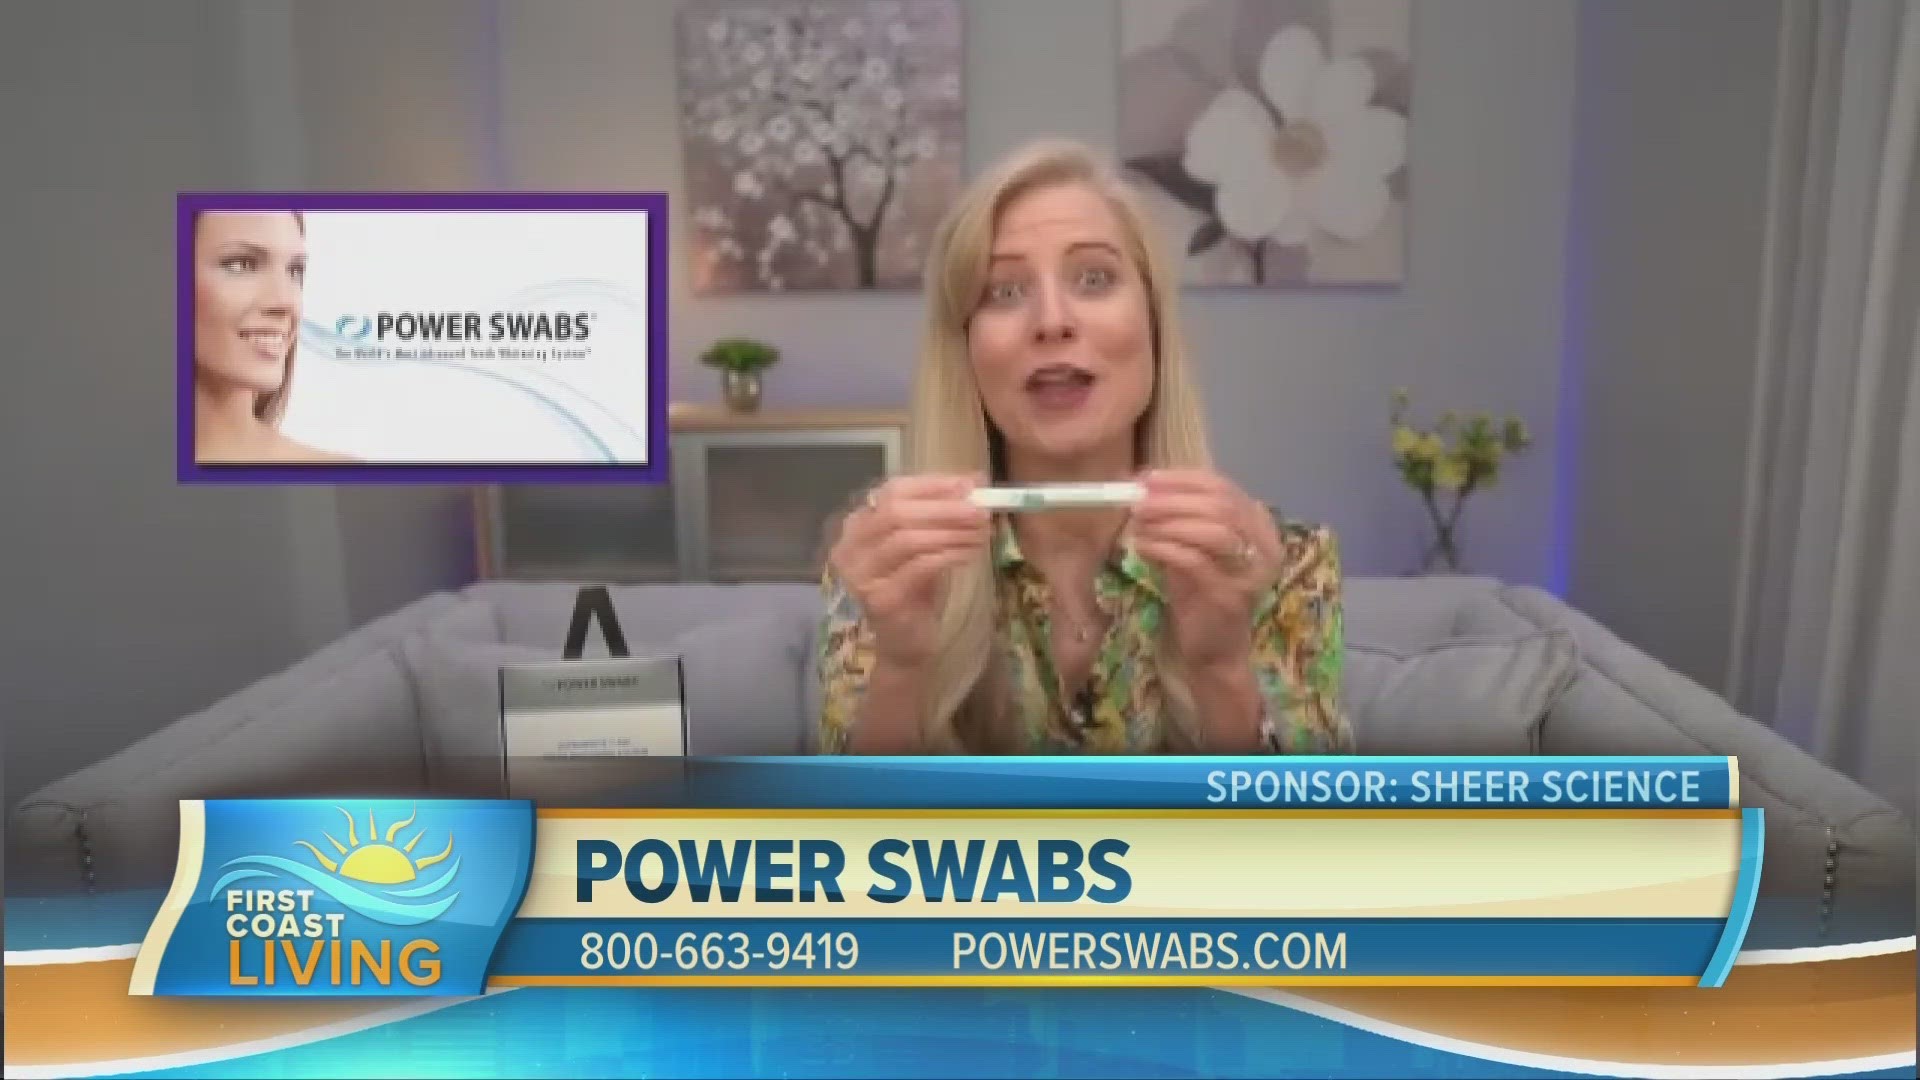 Power Swabs whitens your teeth while hydrating your enamel for little-to-no sensitivity.